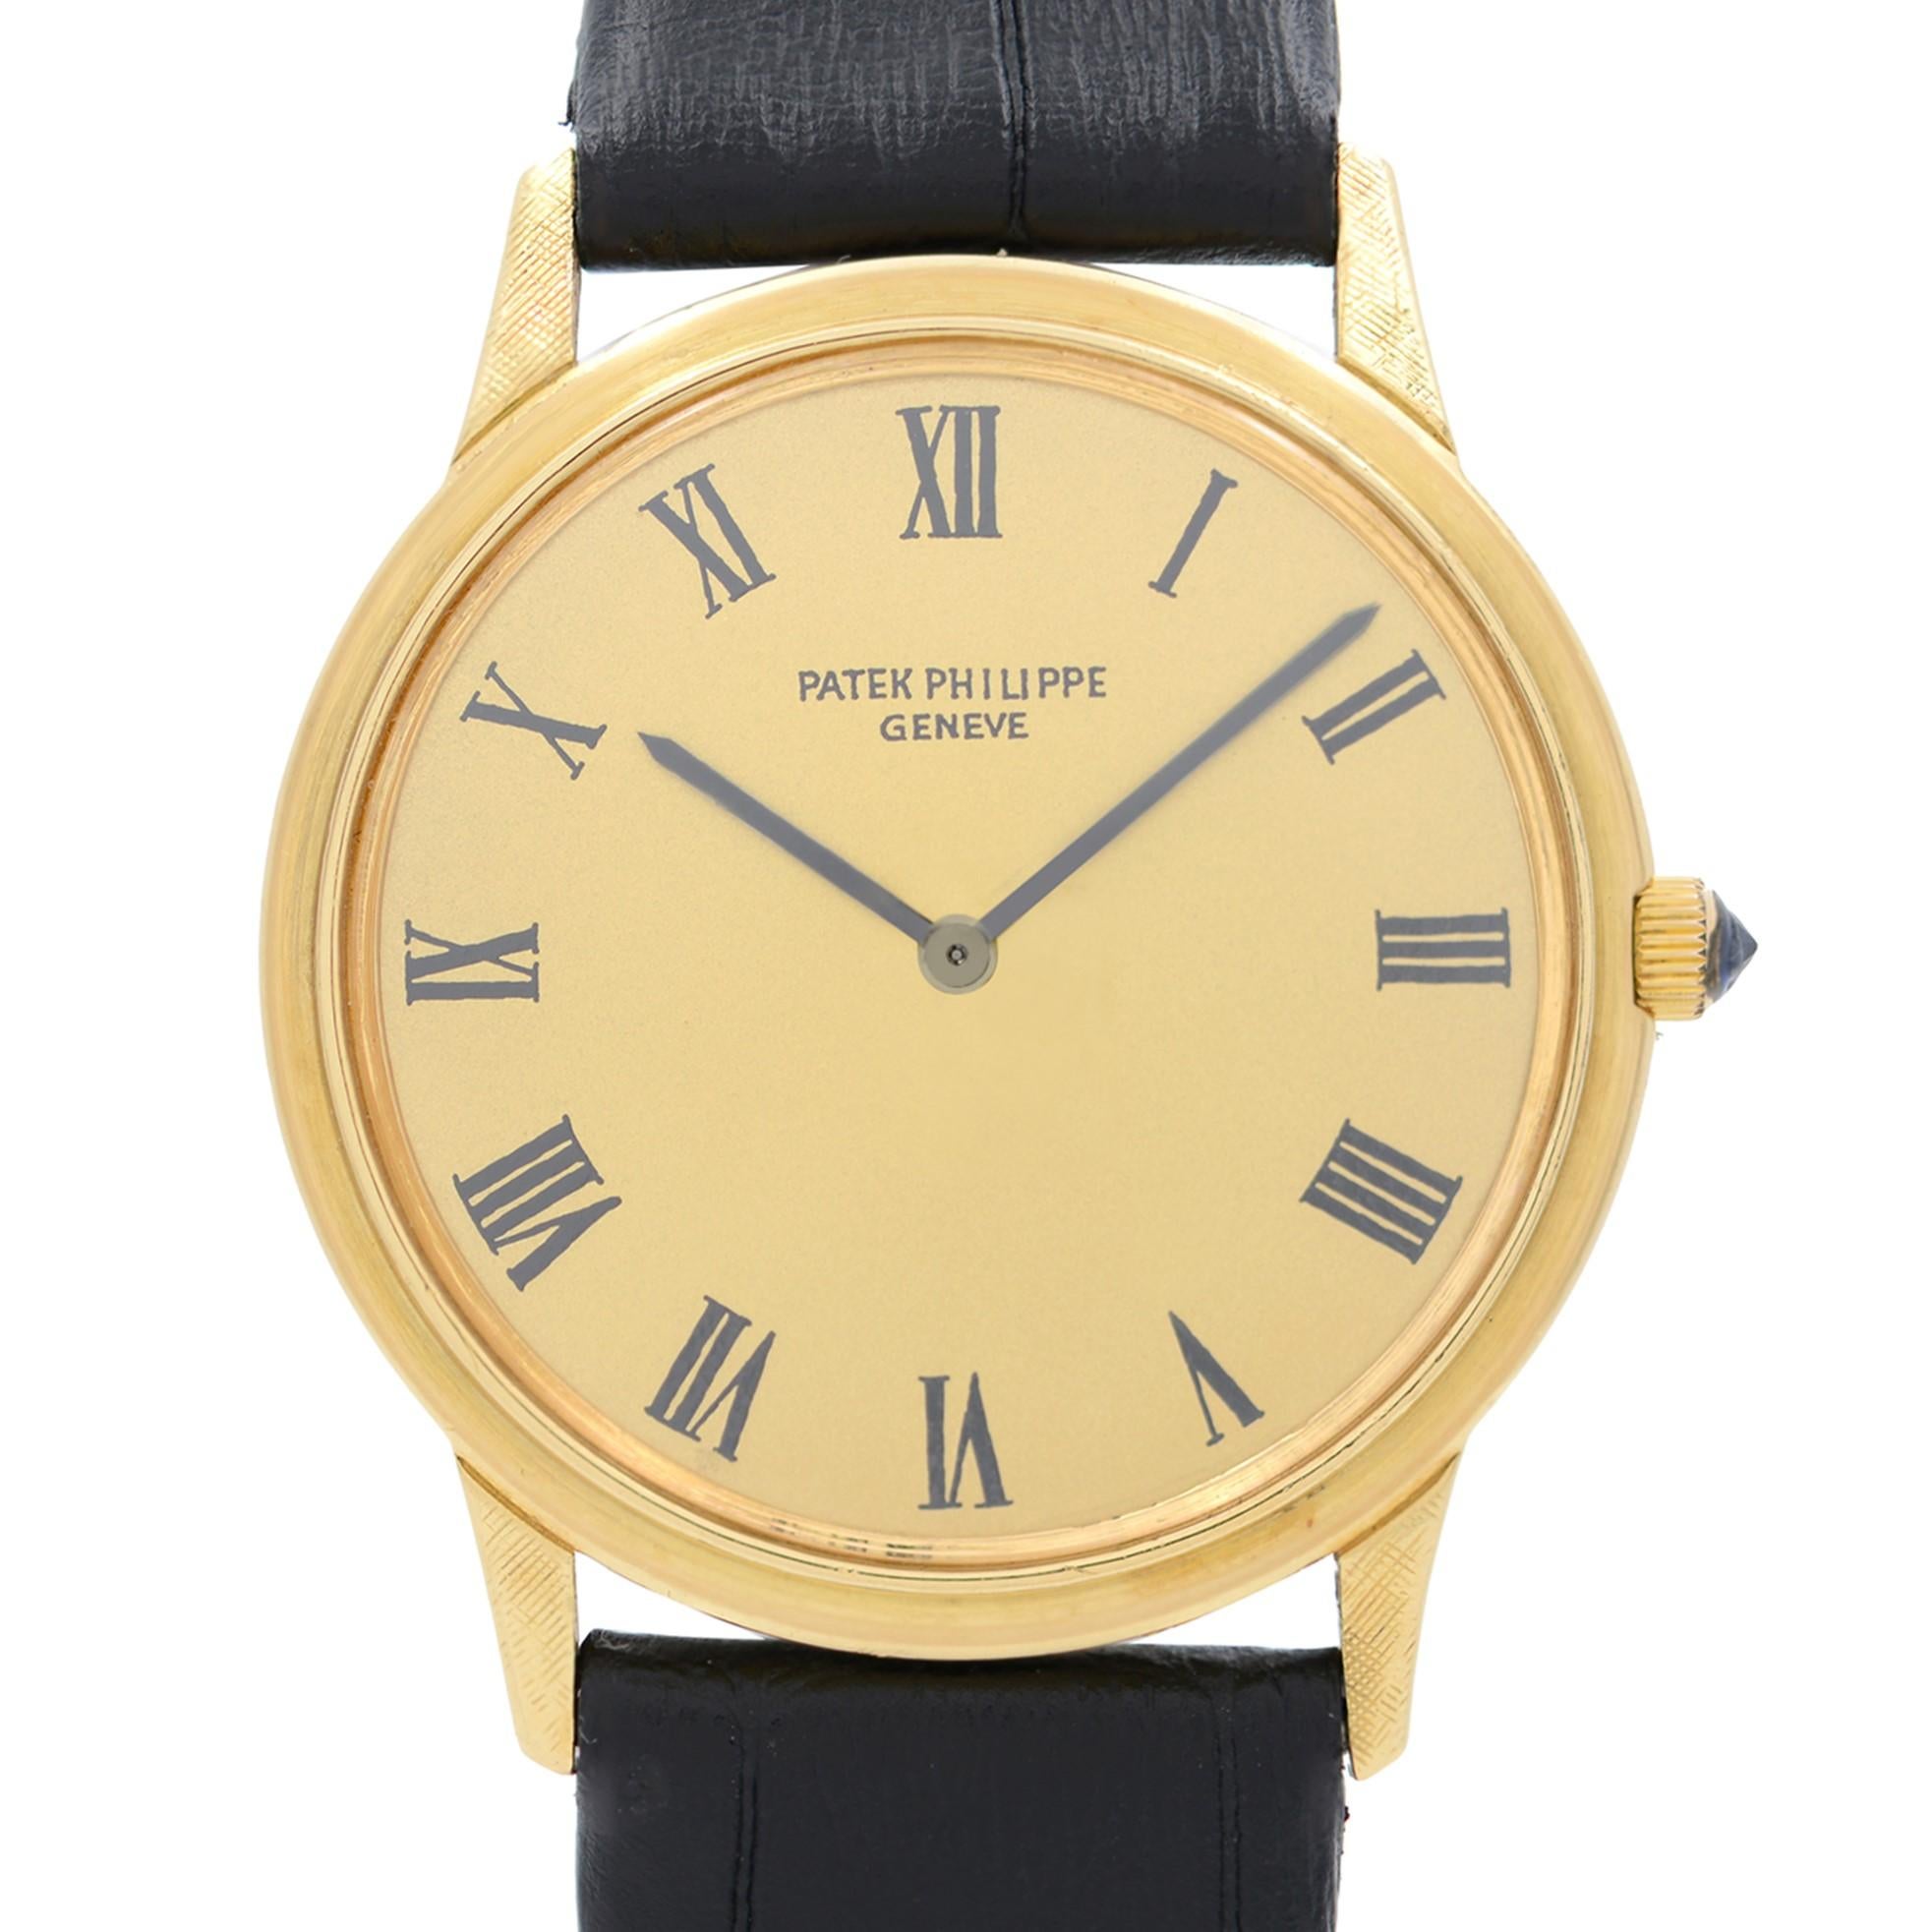 Pre-owned Vintage Patek Philippe Calatrava 33mm 18k Solid Gold Champagne Roman Dial Manual Winding Men's Watch 3591. Watch have refinished Dial. This Watch Has an Aftermarket Band and buckle. The Case and Bezel of this Beautiful Timepiece Show